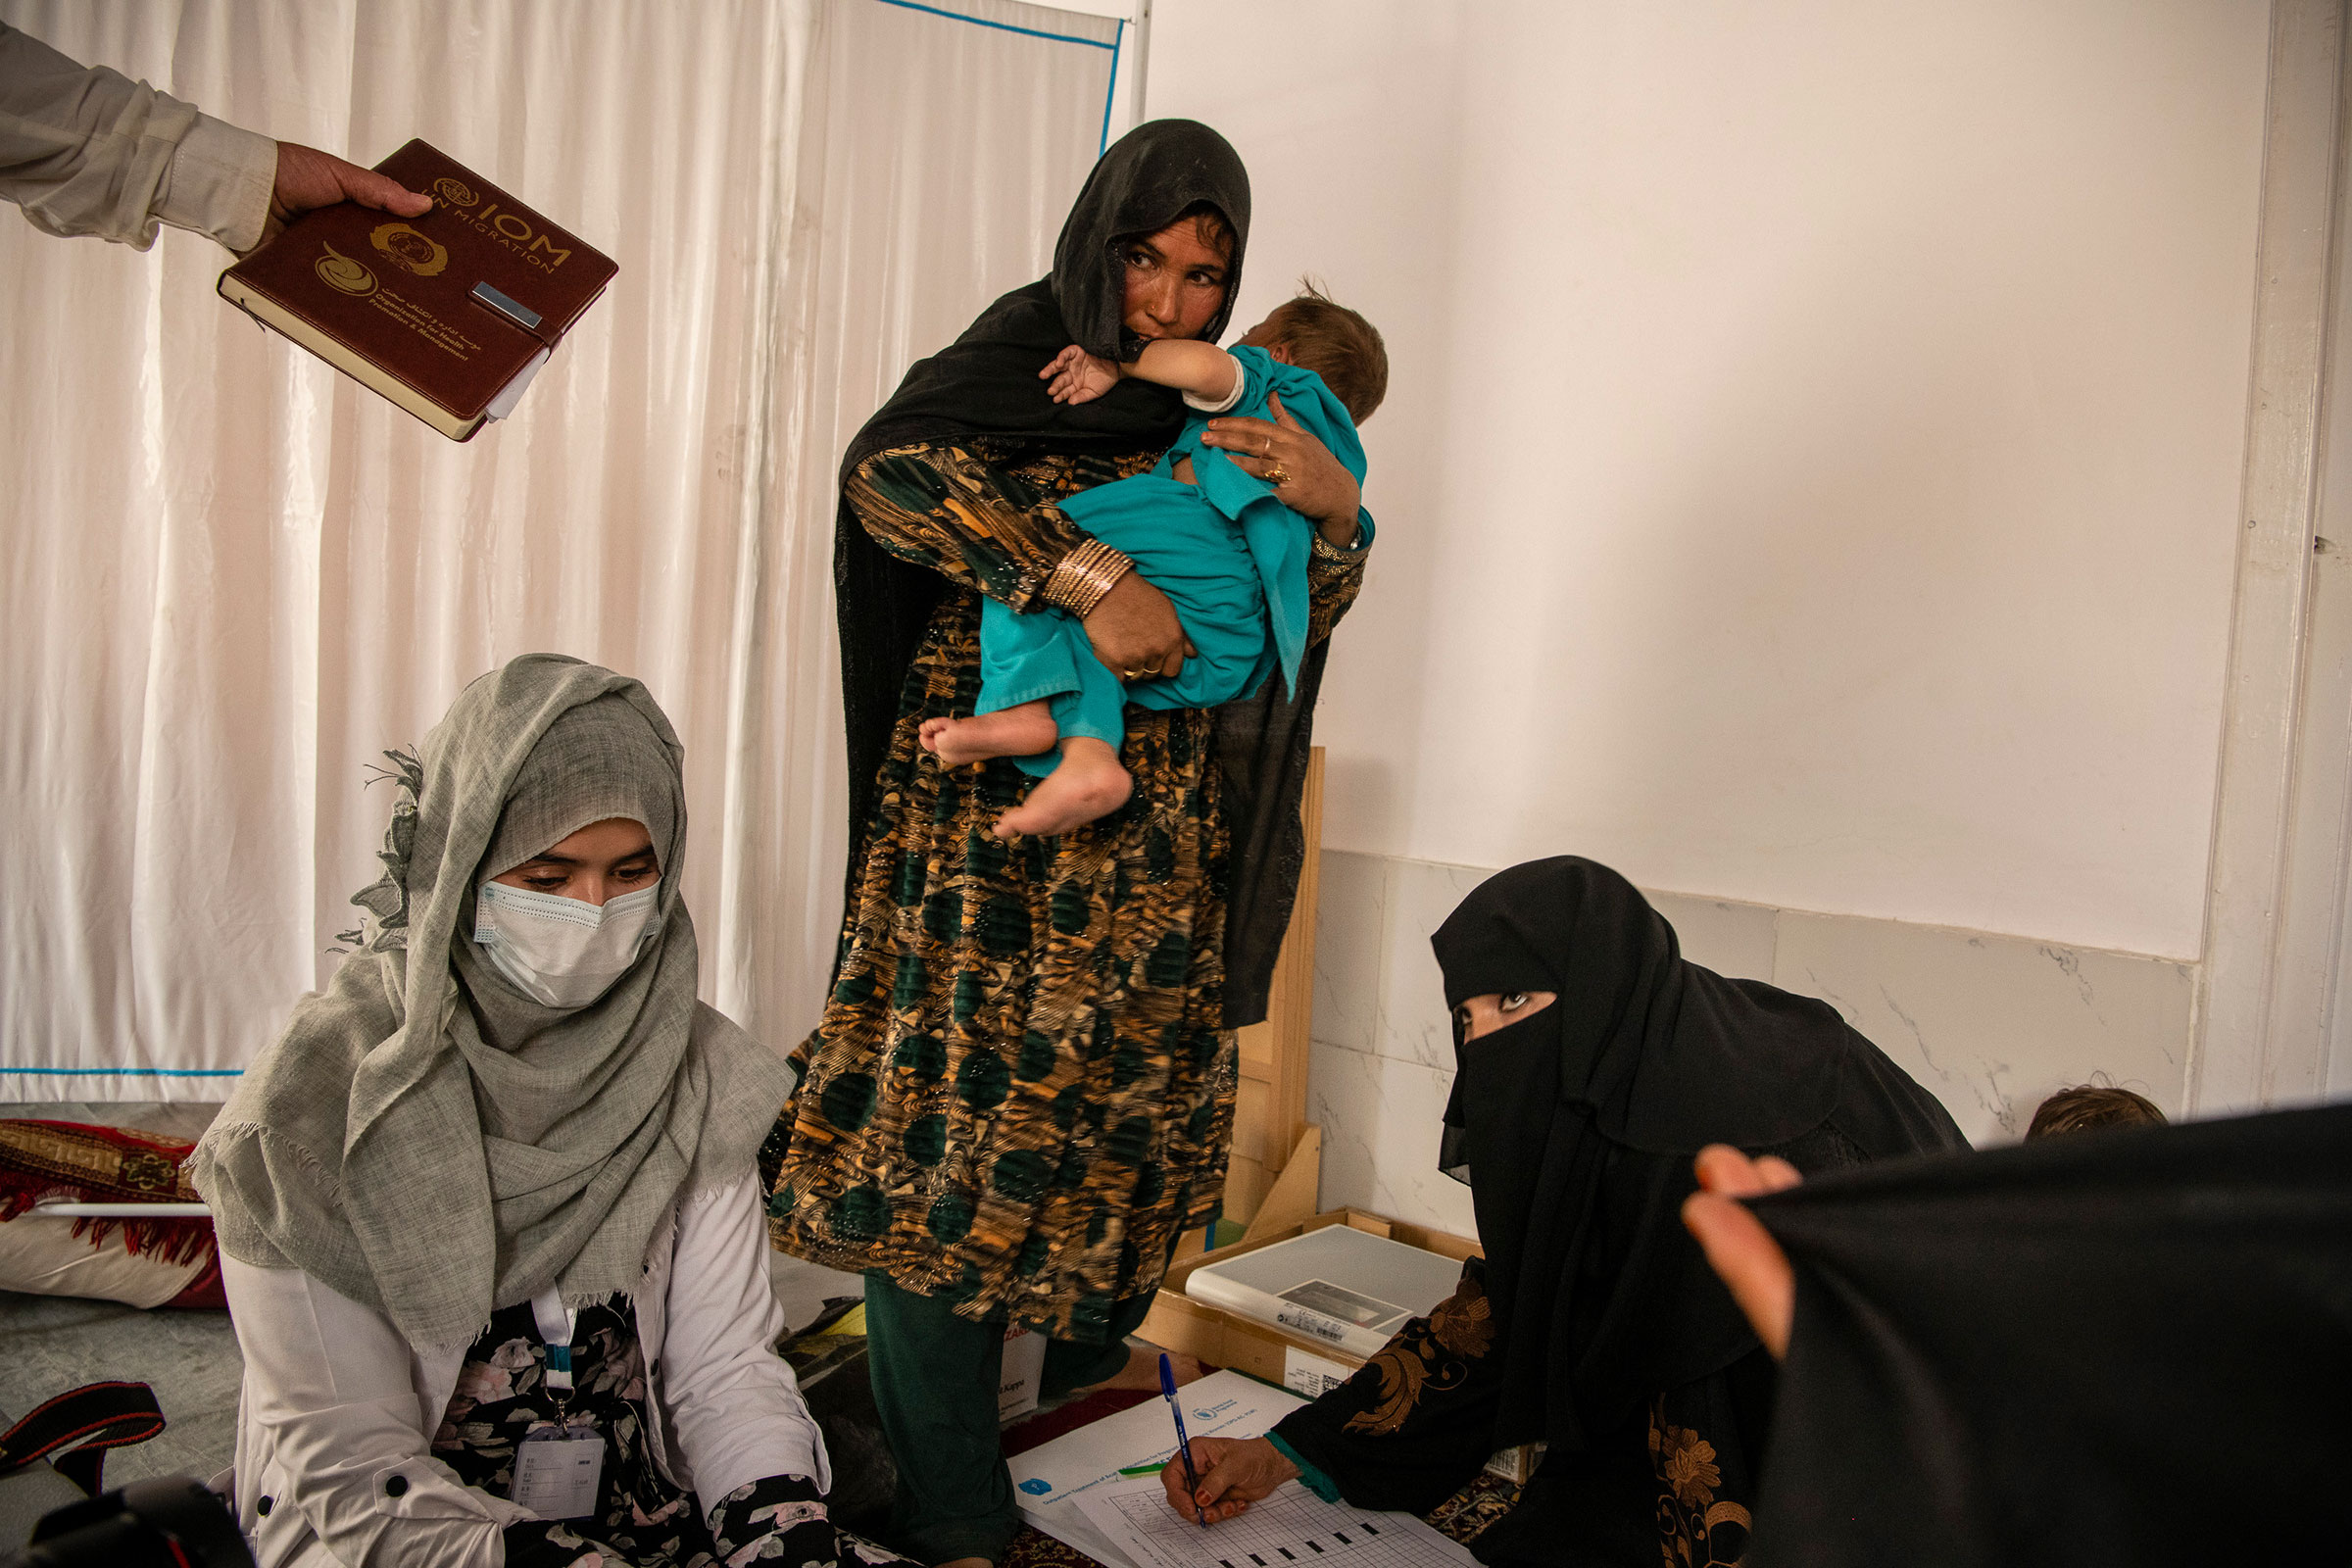 Lahorah, 30, with her year-old son, Safiullah, at a mobile clinic set up by UNICEF in the remote village of Alisha, in Wardak Province, Afghanistan, on June 11. The Taliban's rulers have reinstituted an emirate governed by a strict interpretation of Islamic law and issued a flood of edicts curtailing women's rights, institutionalizing patriarchal customs, restricting journalists and effectively erasing many vestiges of an American-led occupation and nation-building effort. (Kiana Hayeri—The New York Times/Redux)